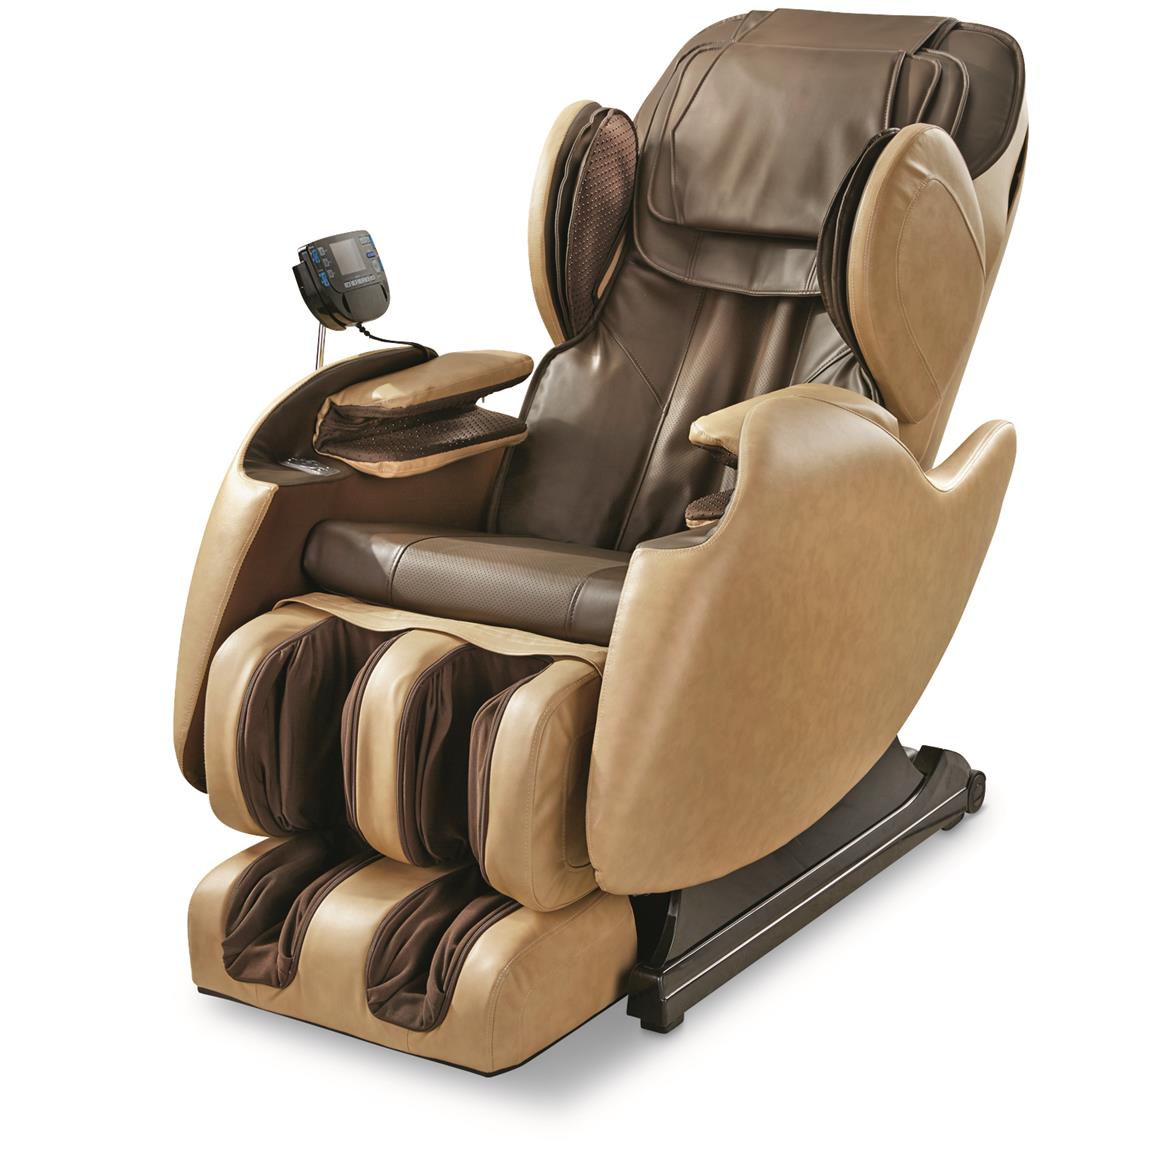 Deluxe Massage Chair - 676473, Massage Chairs & Tables at Sportsman's Guide